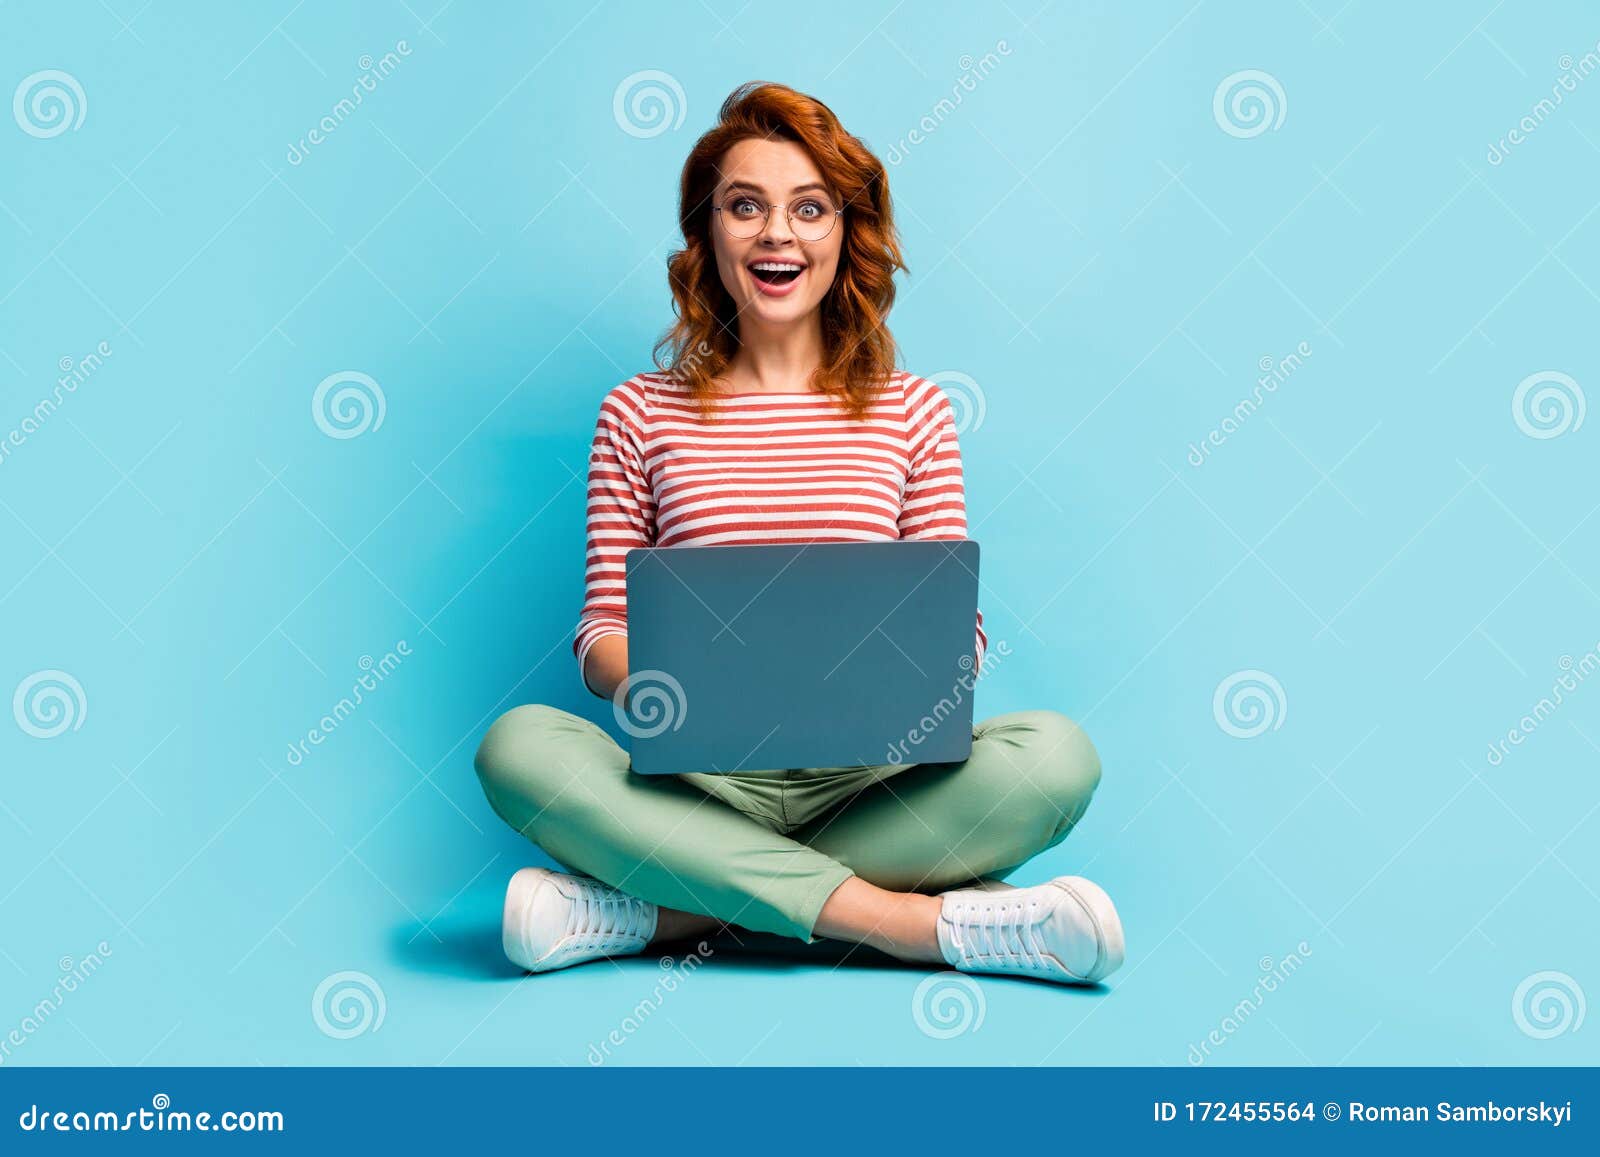 Full Size Photo of Crazy Astonished Girl Sit Floor Legs Crossed Work ...